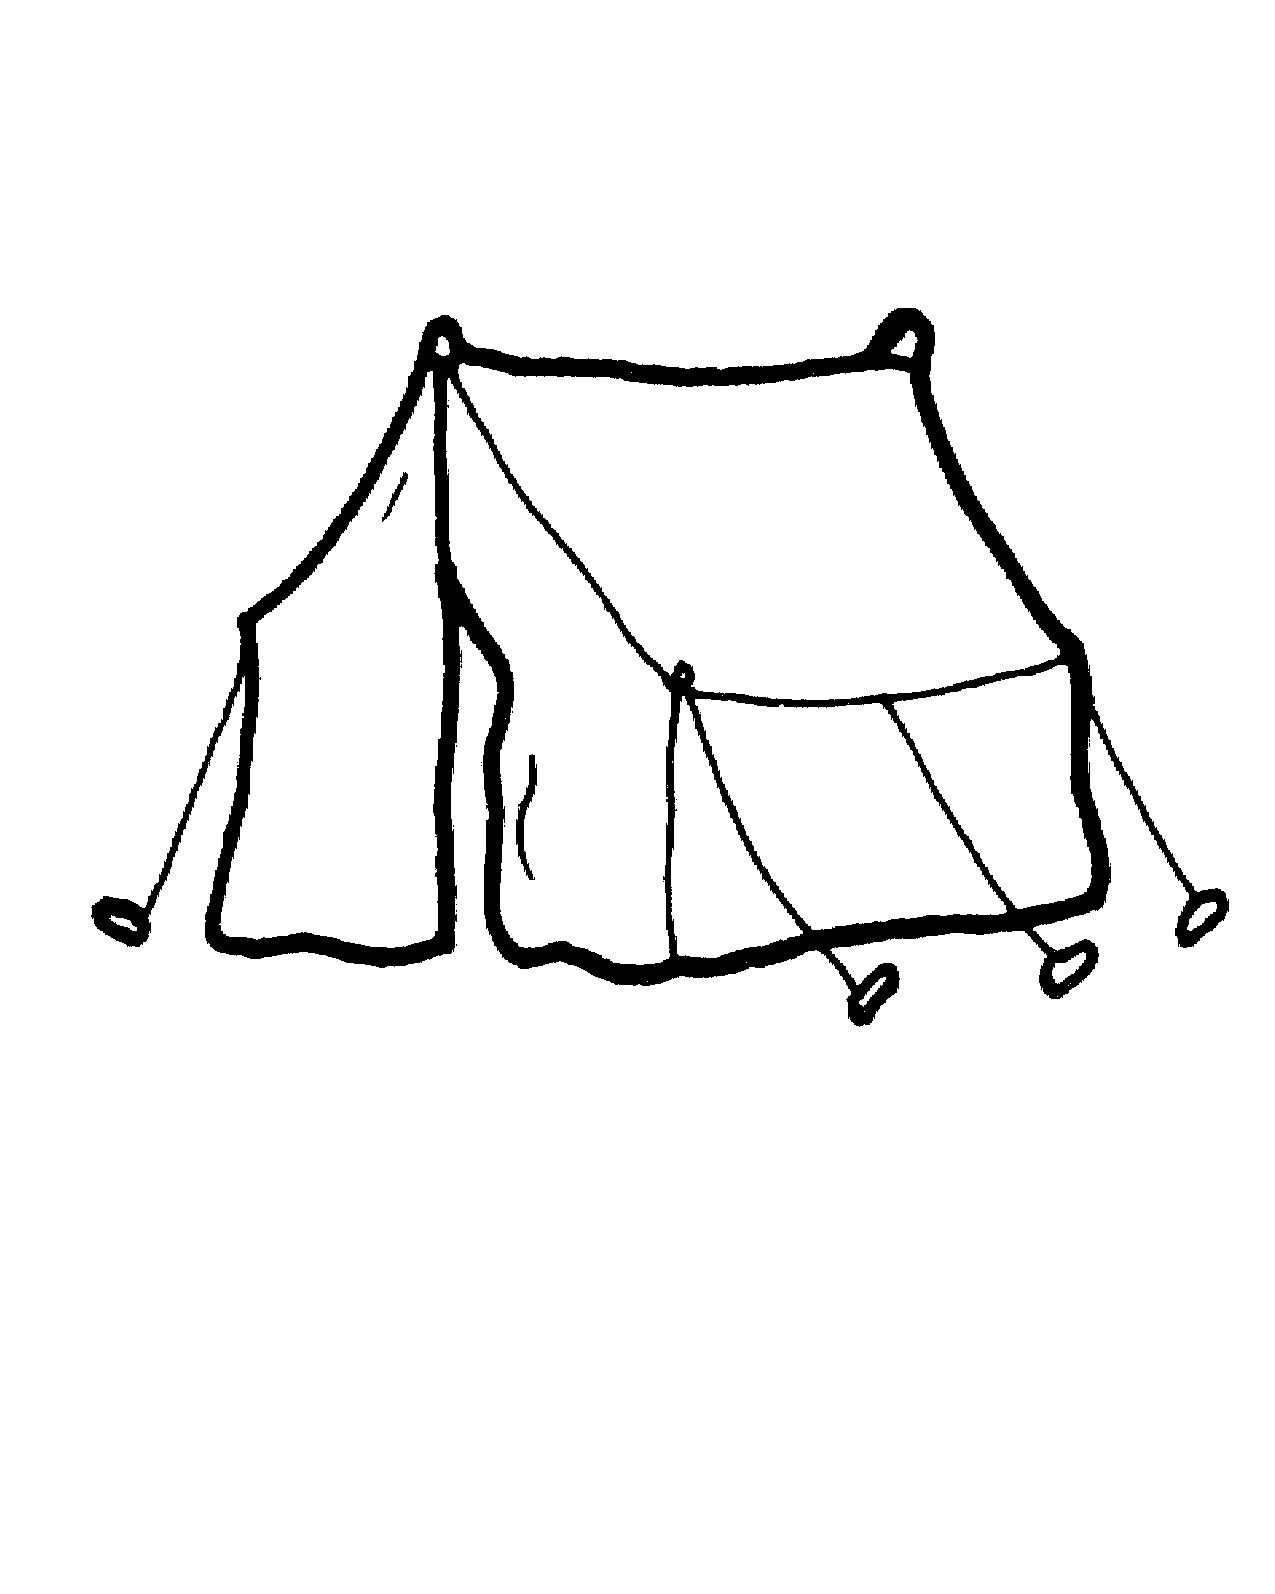 Tent Coloring Page.